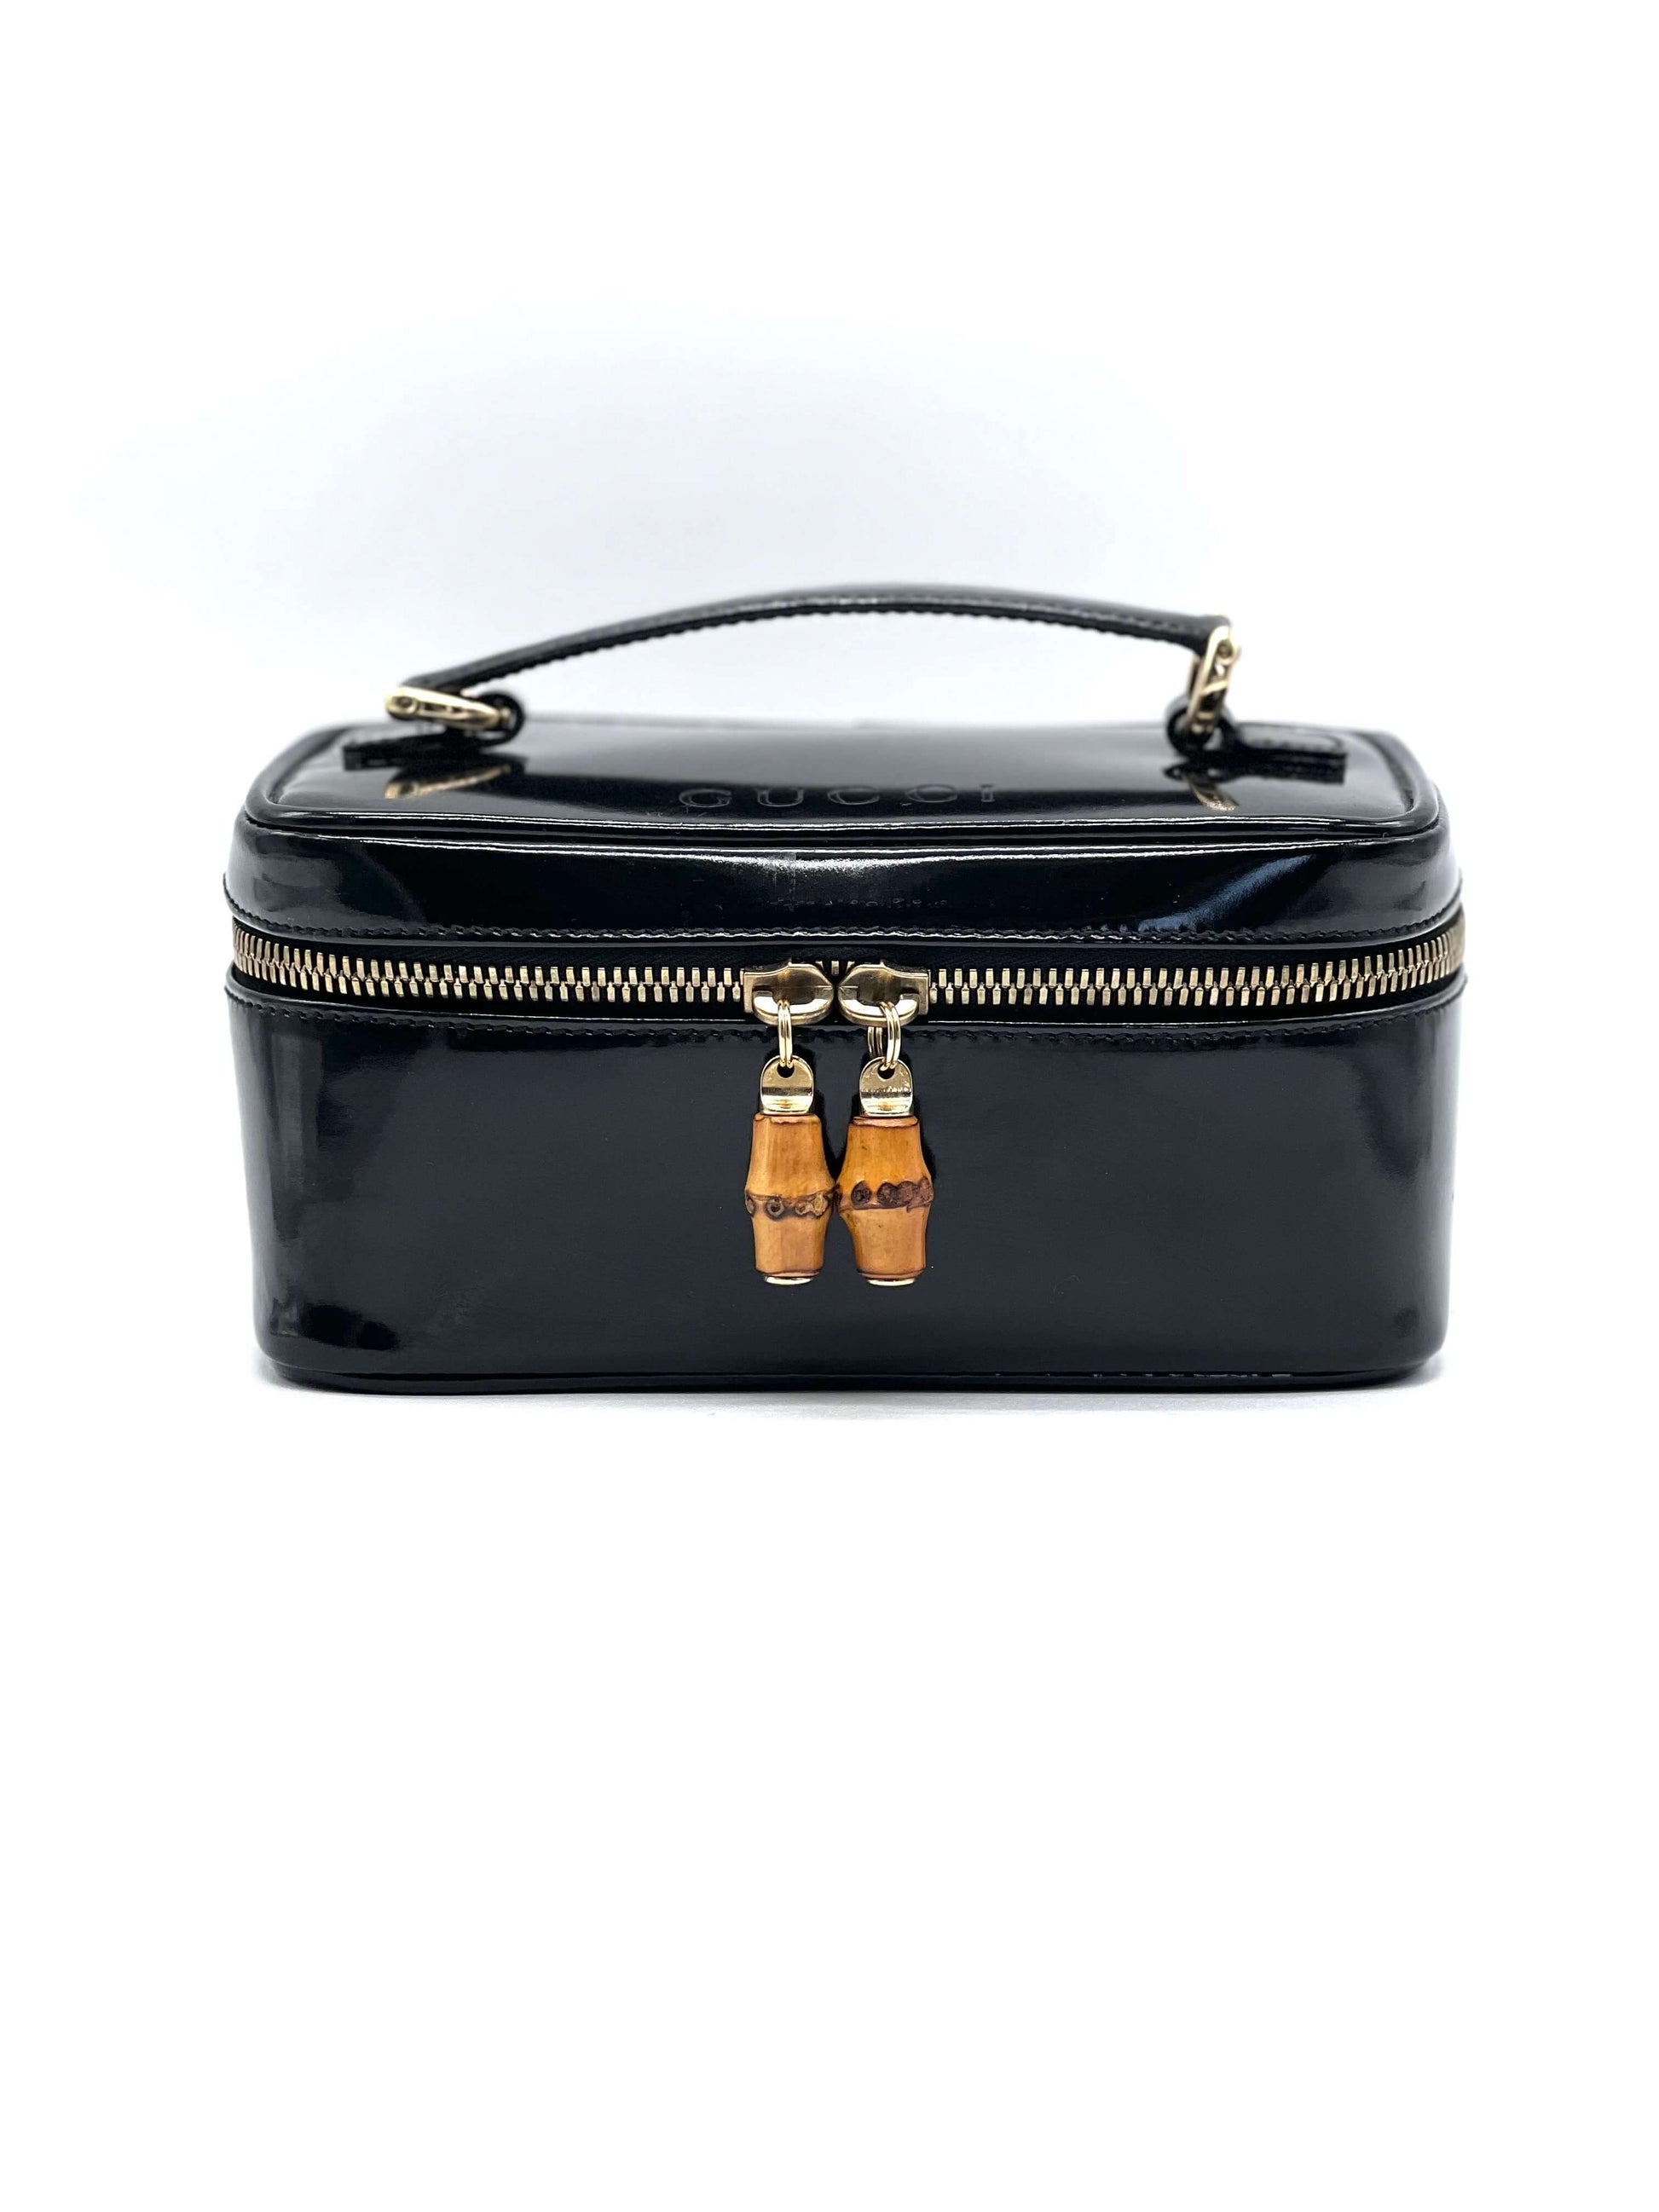 Gucci Black Patent Vanity Lunch Box Top Handle Bag 734gks324